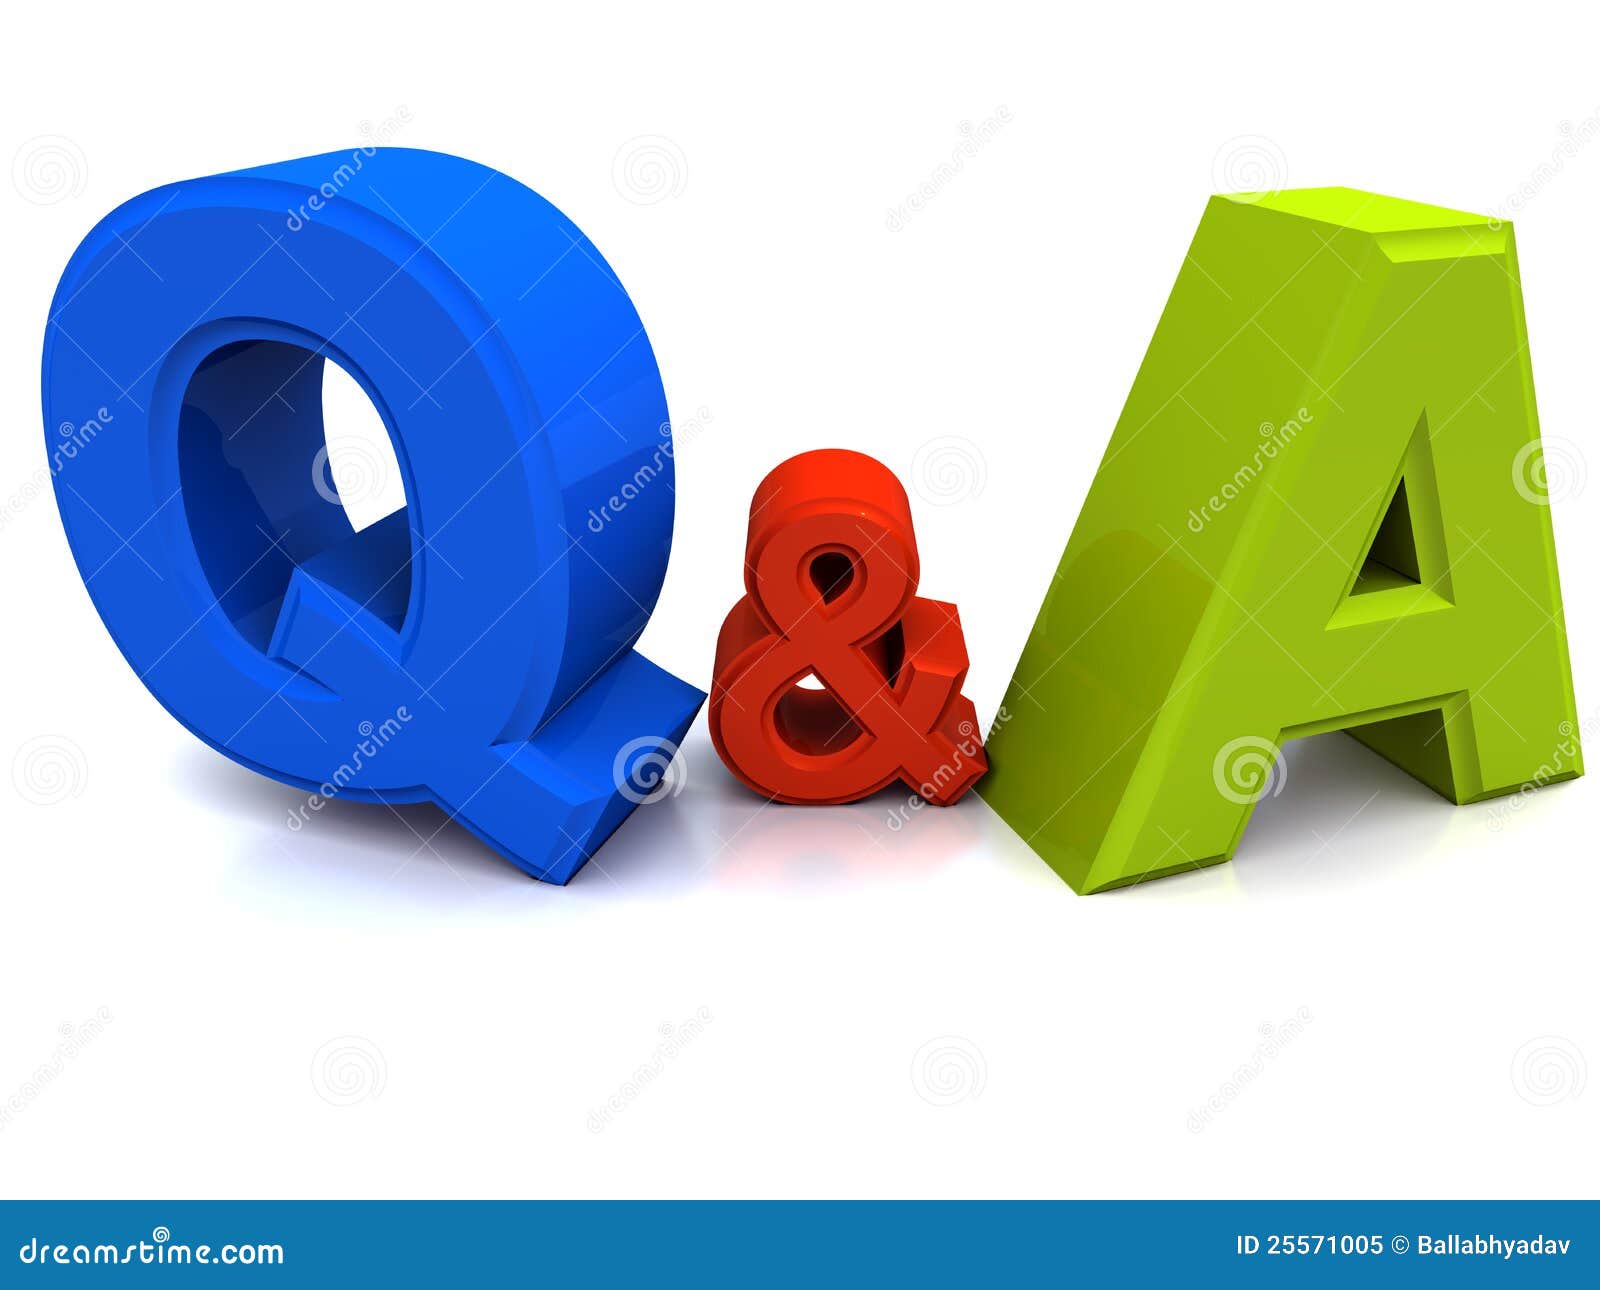 clipart question and answer - photo #47